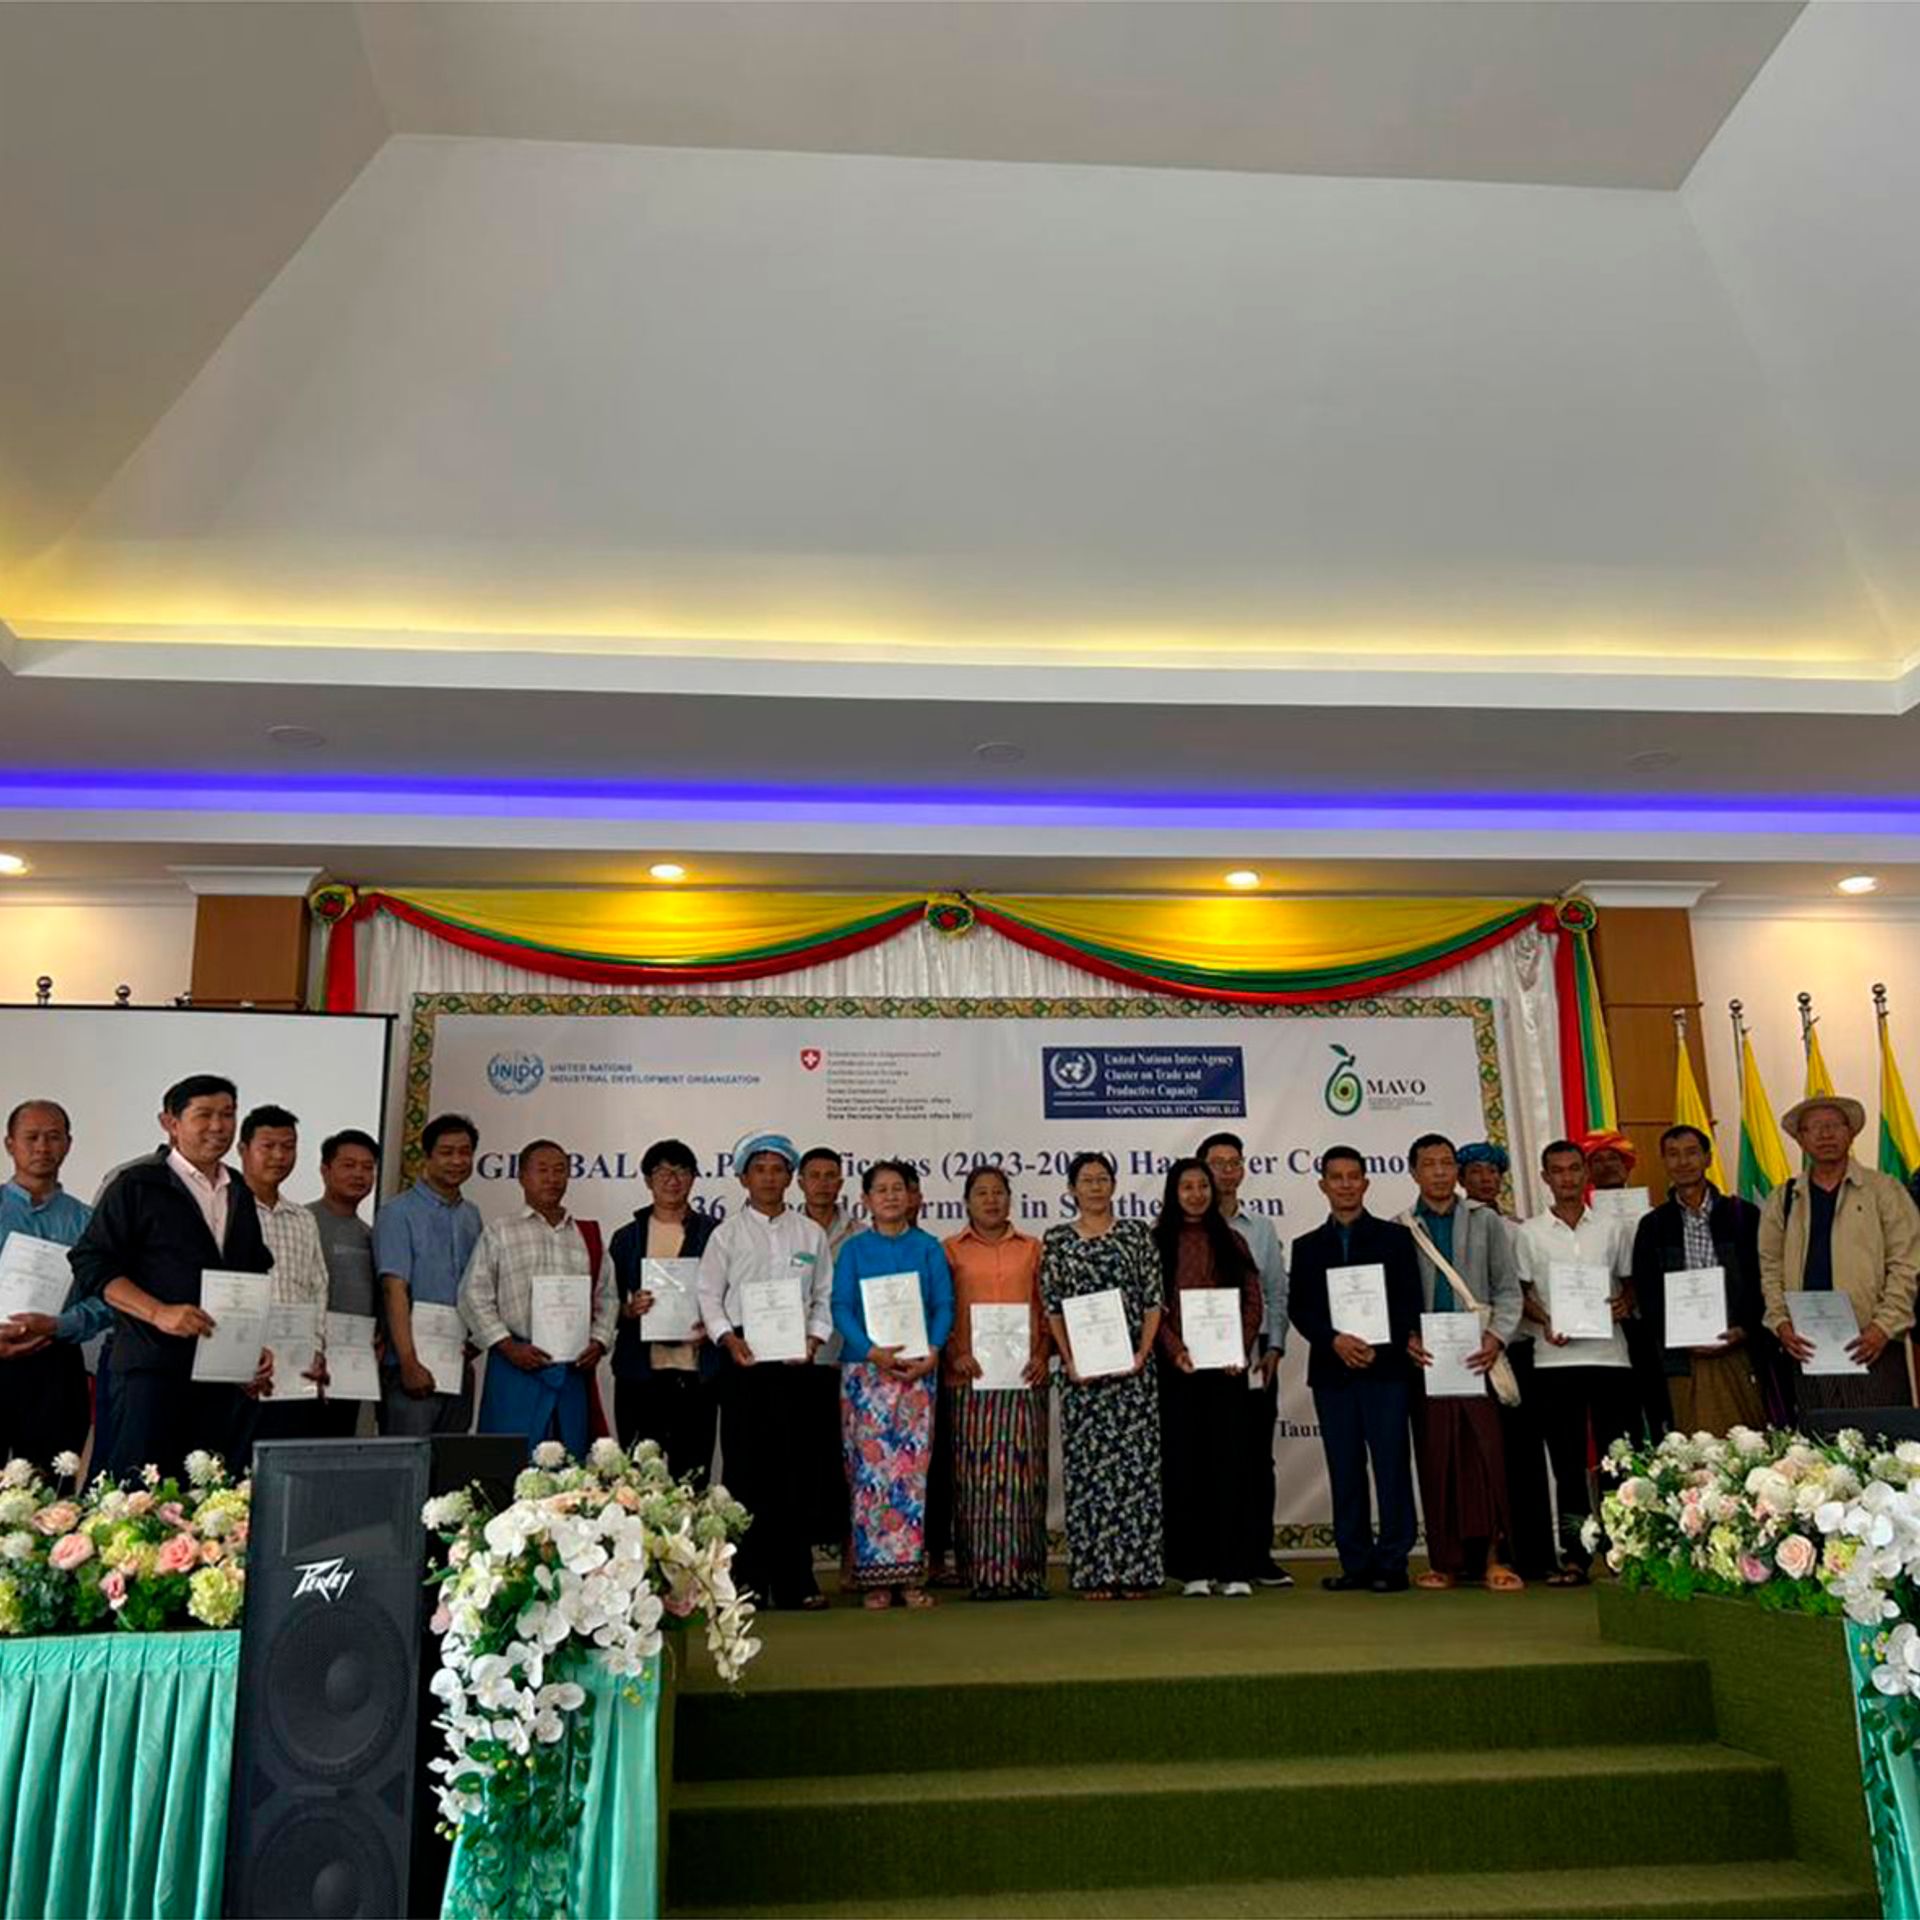 Participants in a GLOBALG.A.P. Capacity Building project in Myanmar.